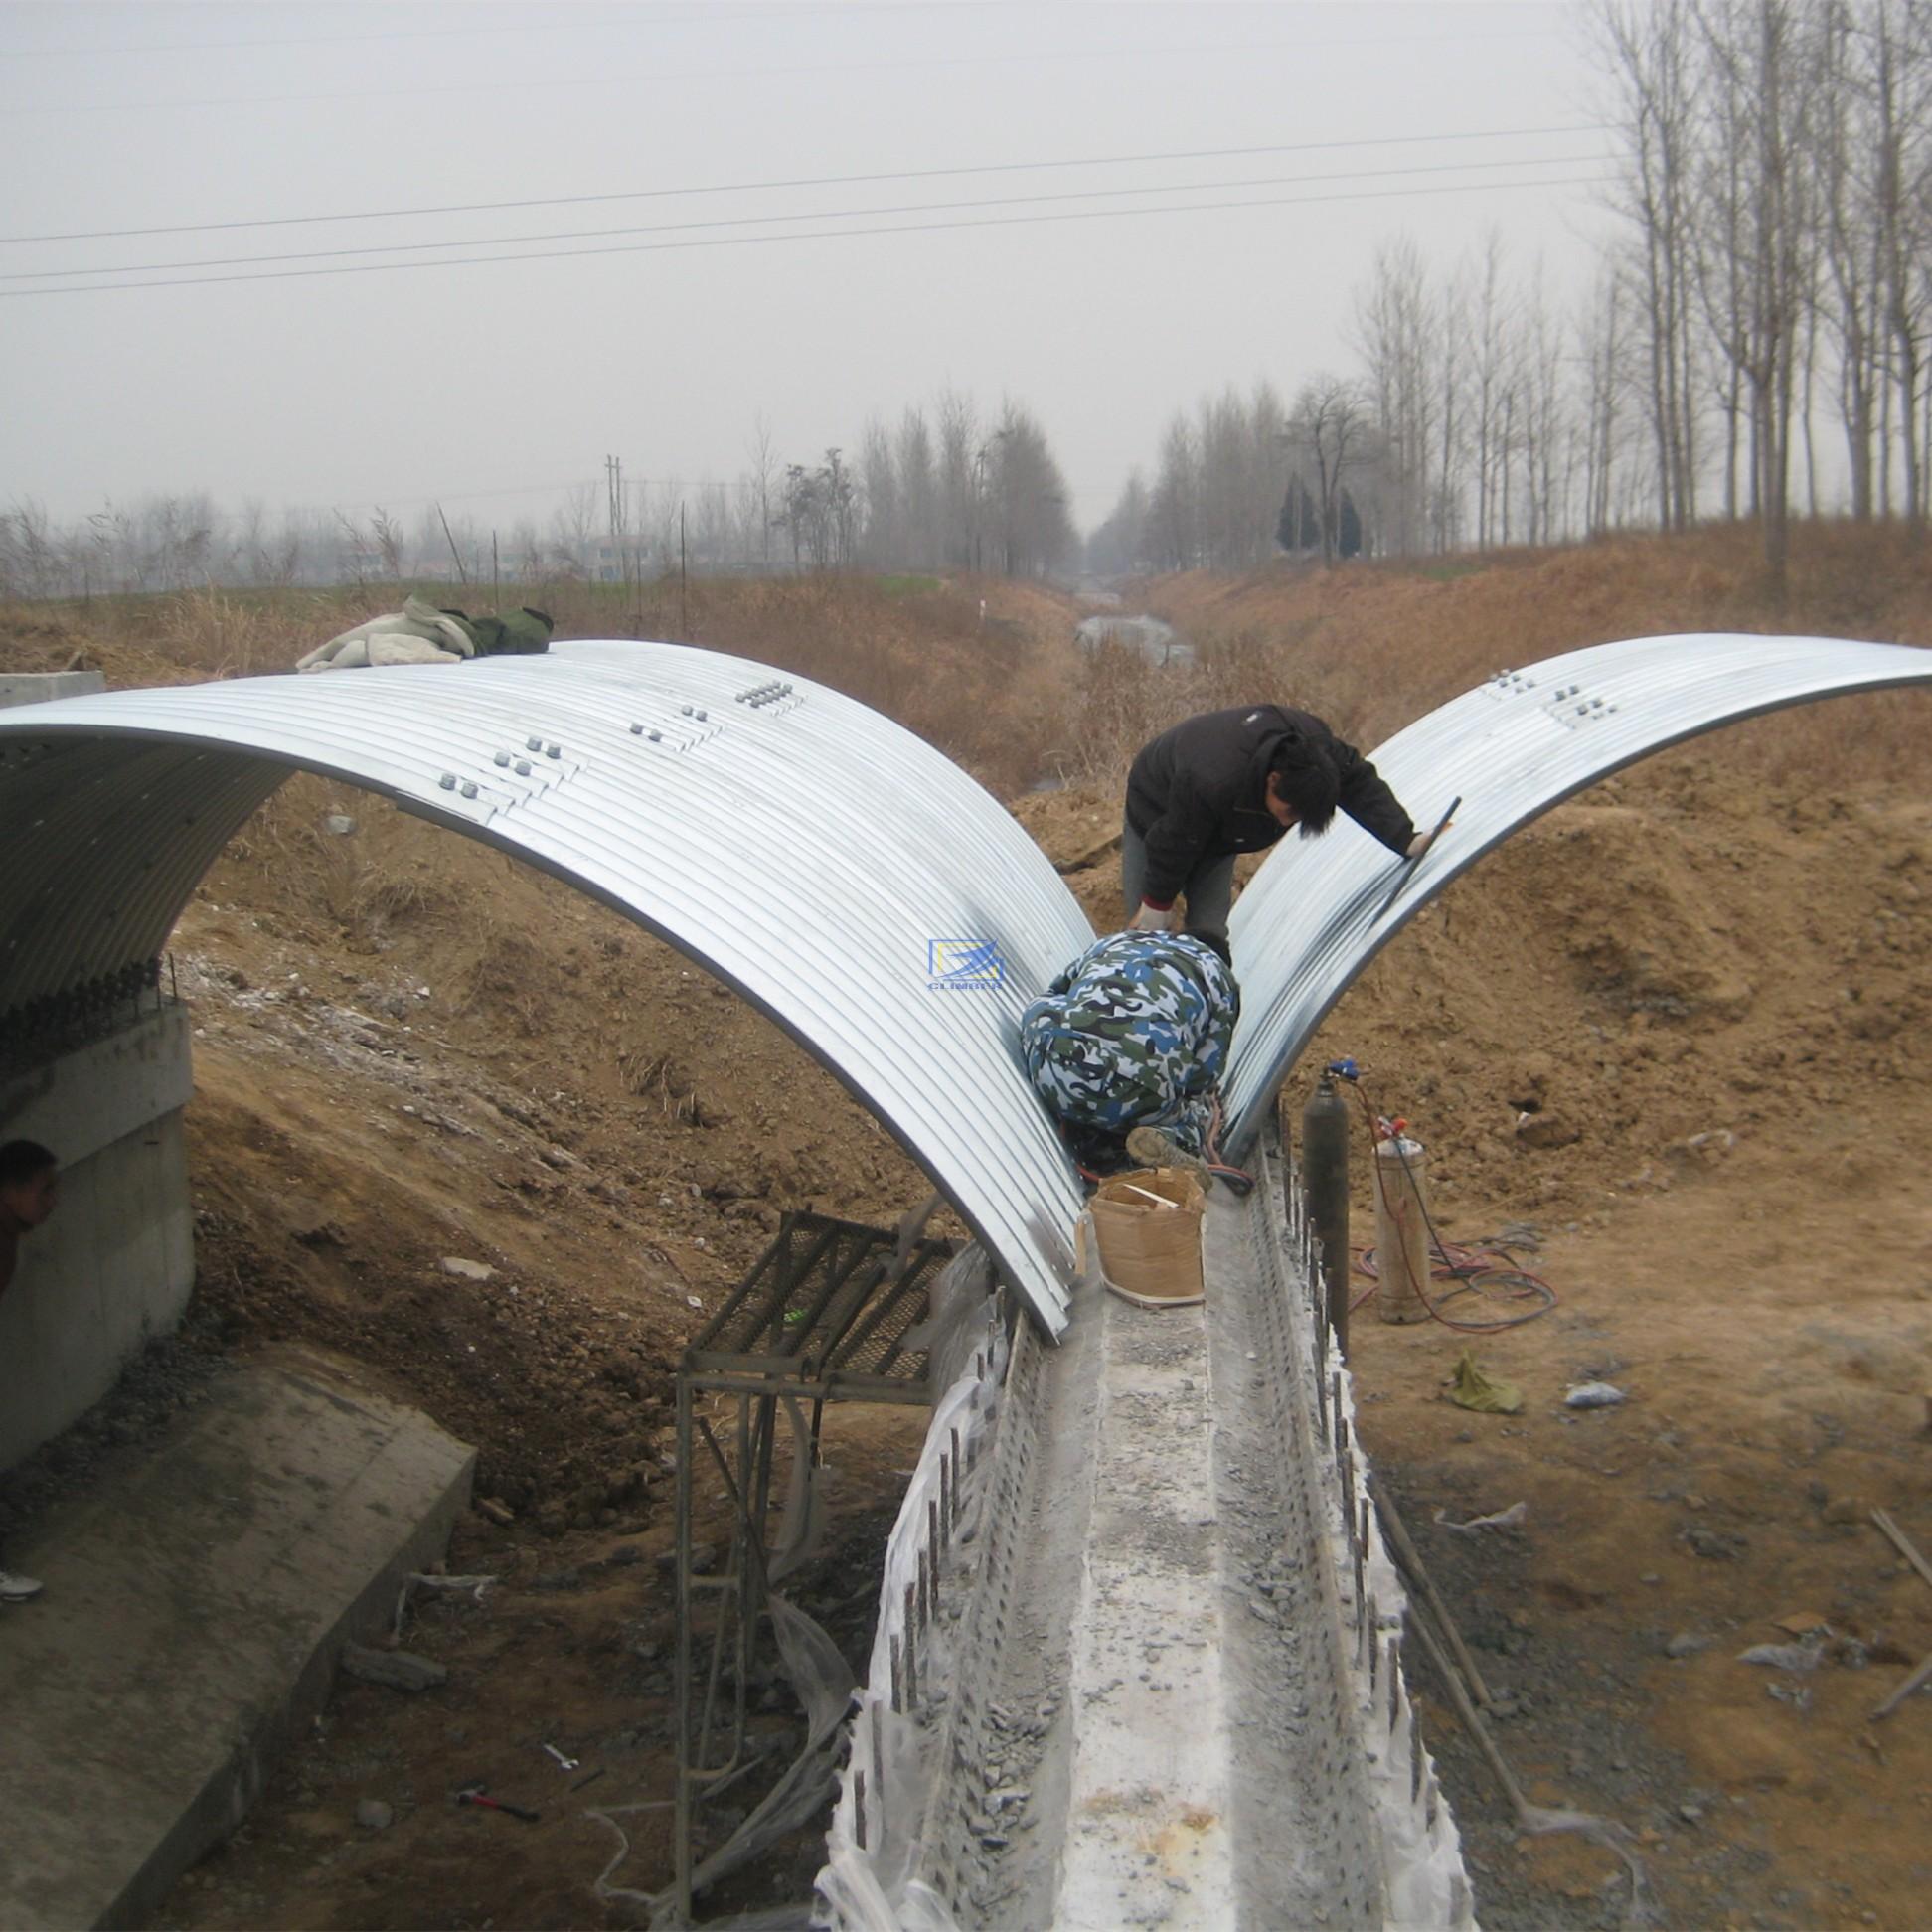 round corrugated steel culvert pipe assembled by bolts and nuts